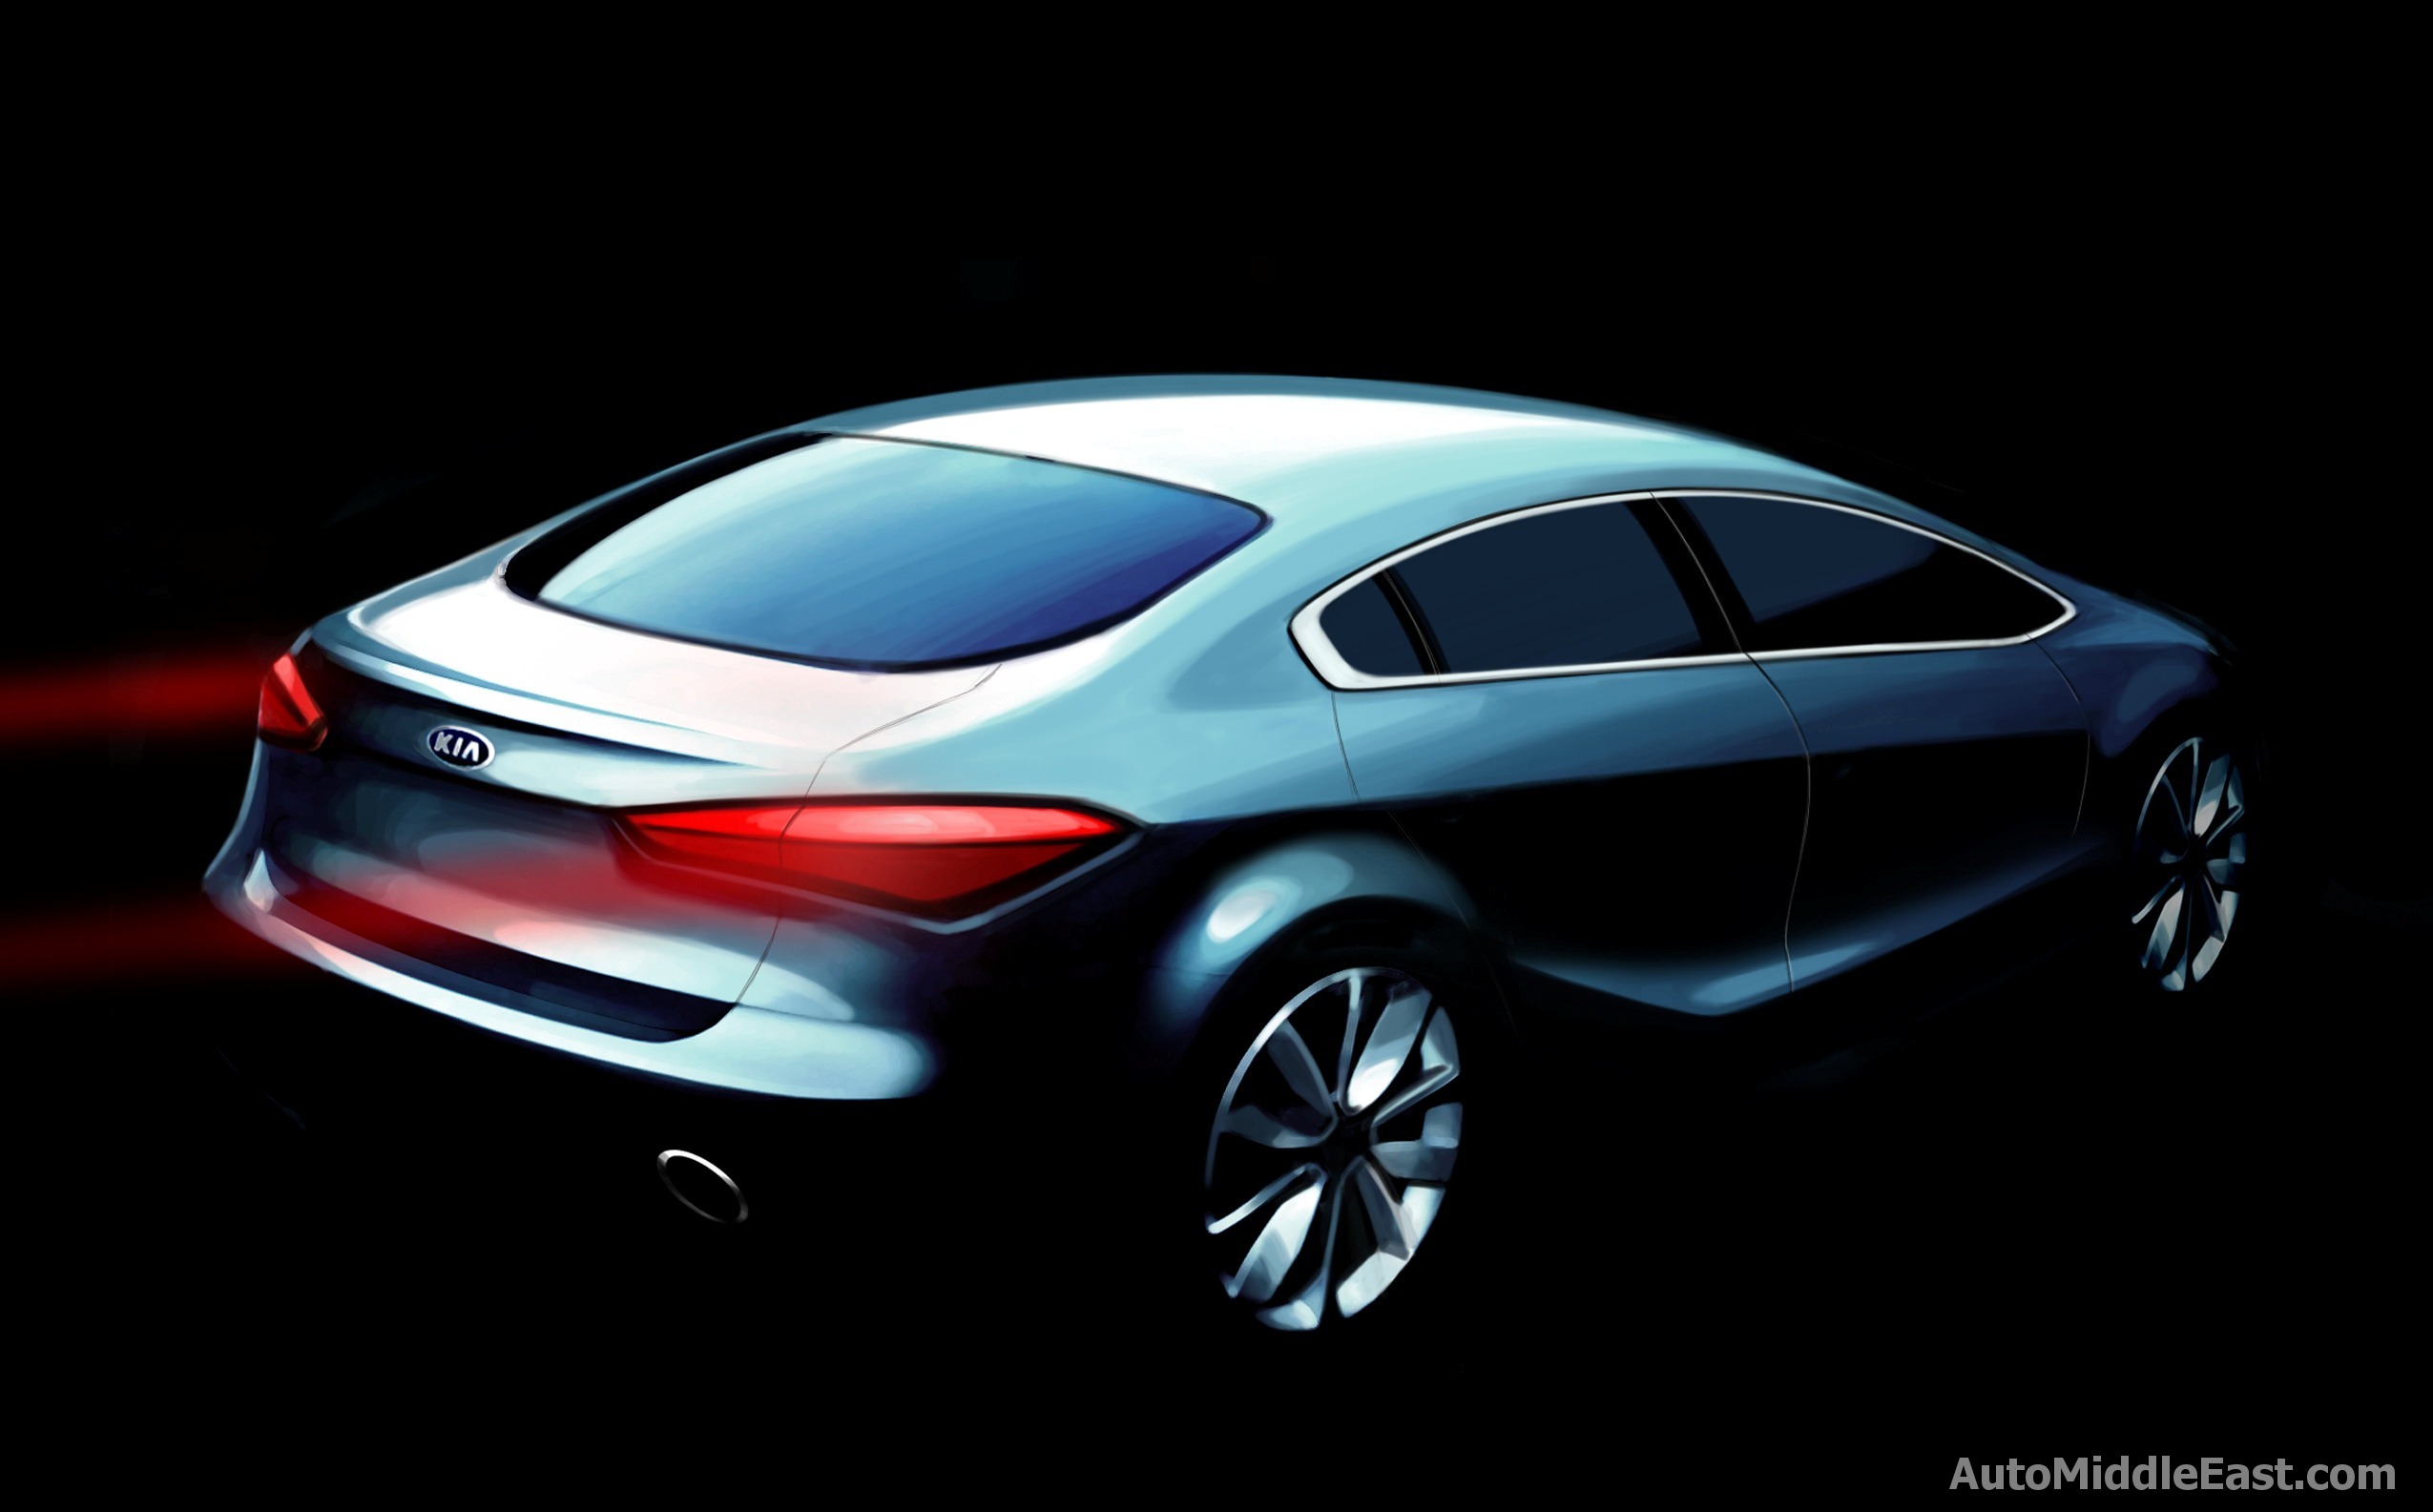 2013 Kia Cerato teaser images released | Updated